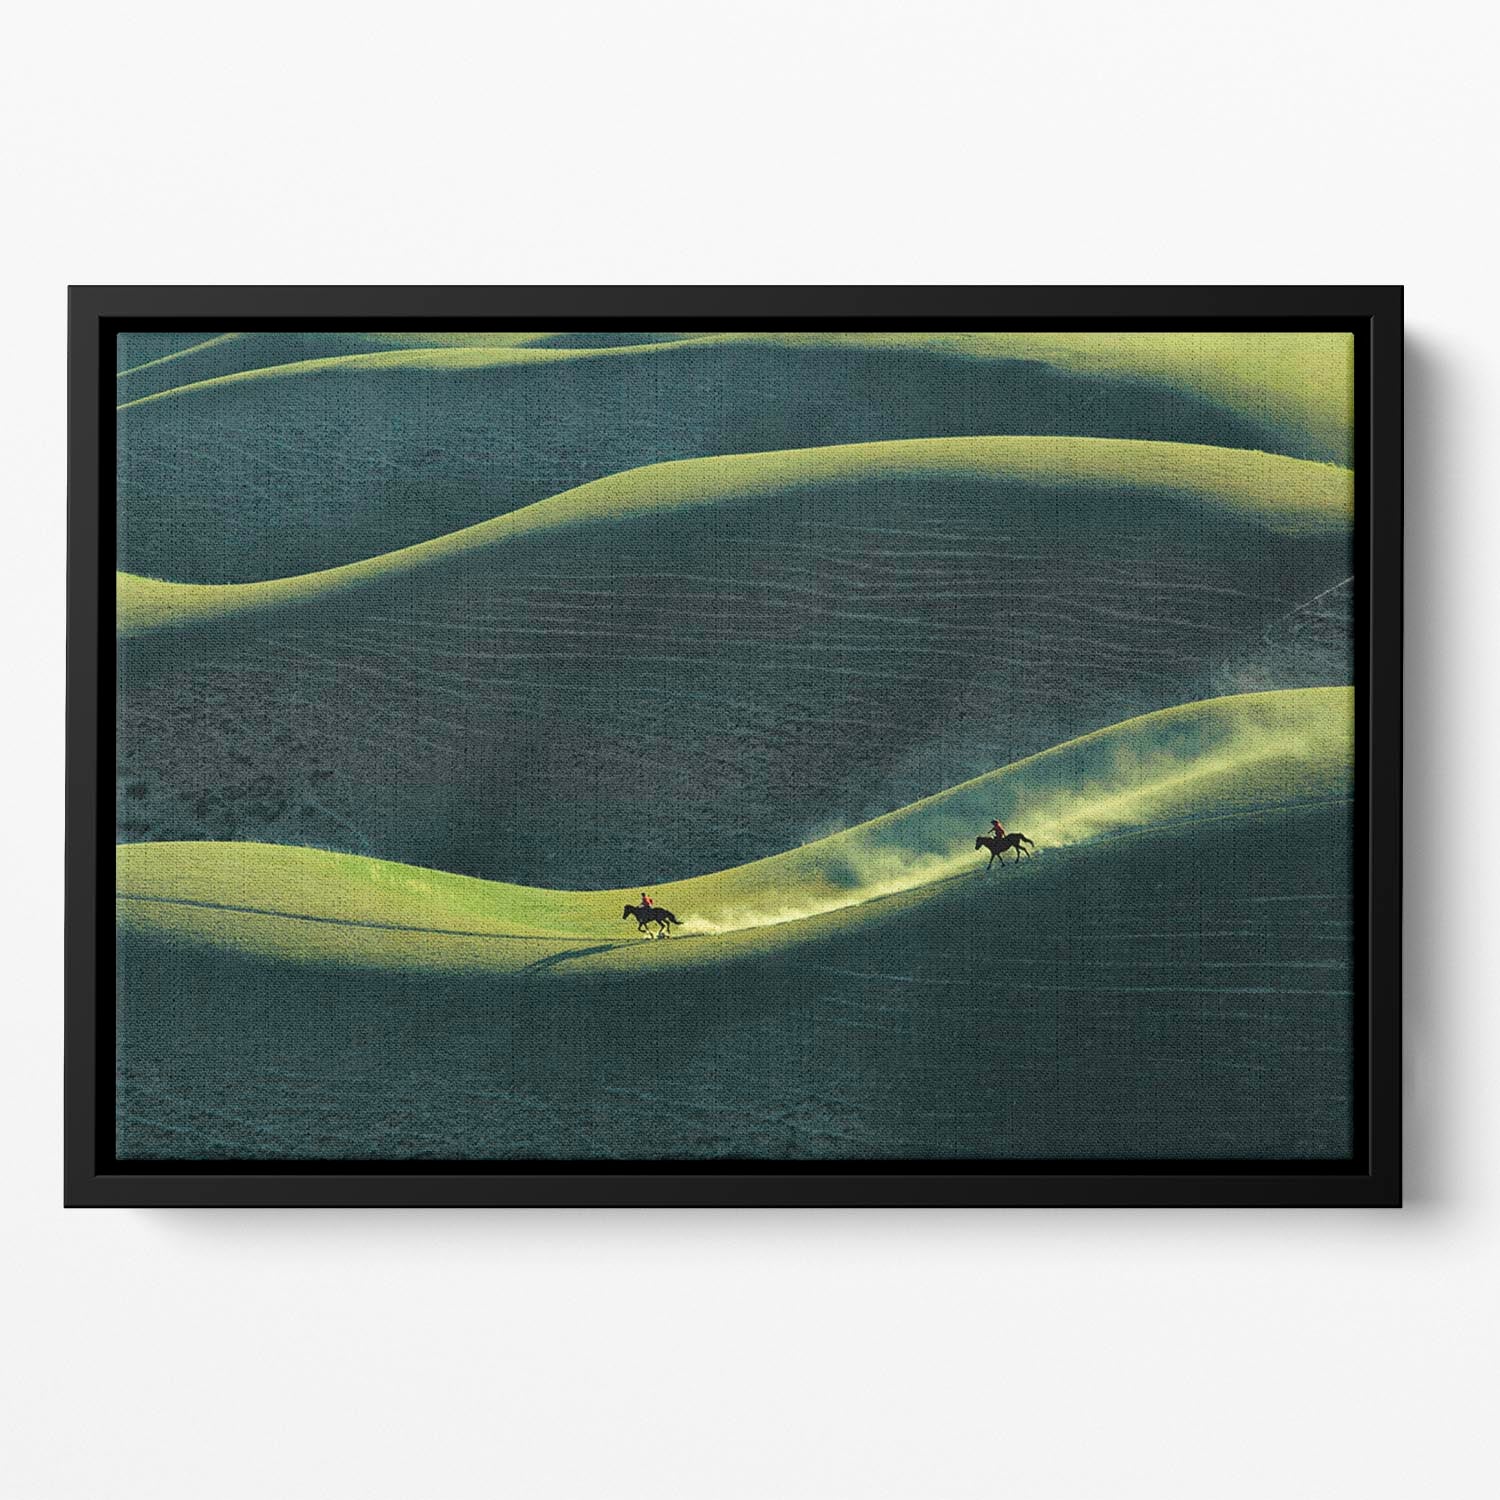 Horseriding In The Hills Floating Framed Canvas - Canvas Art Rocks - 2